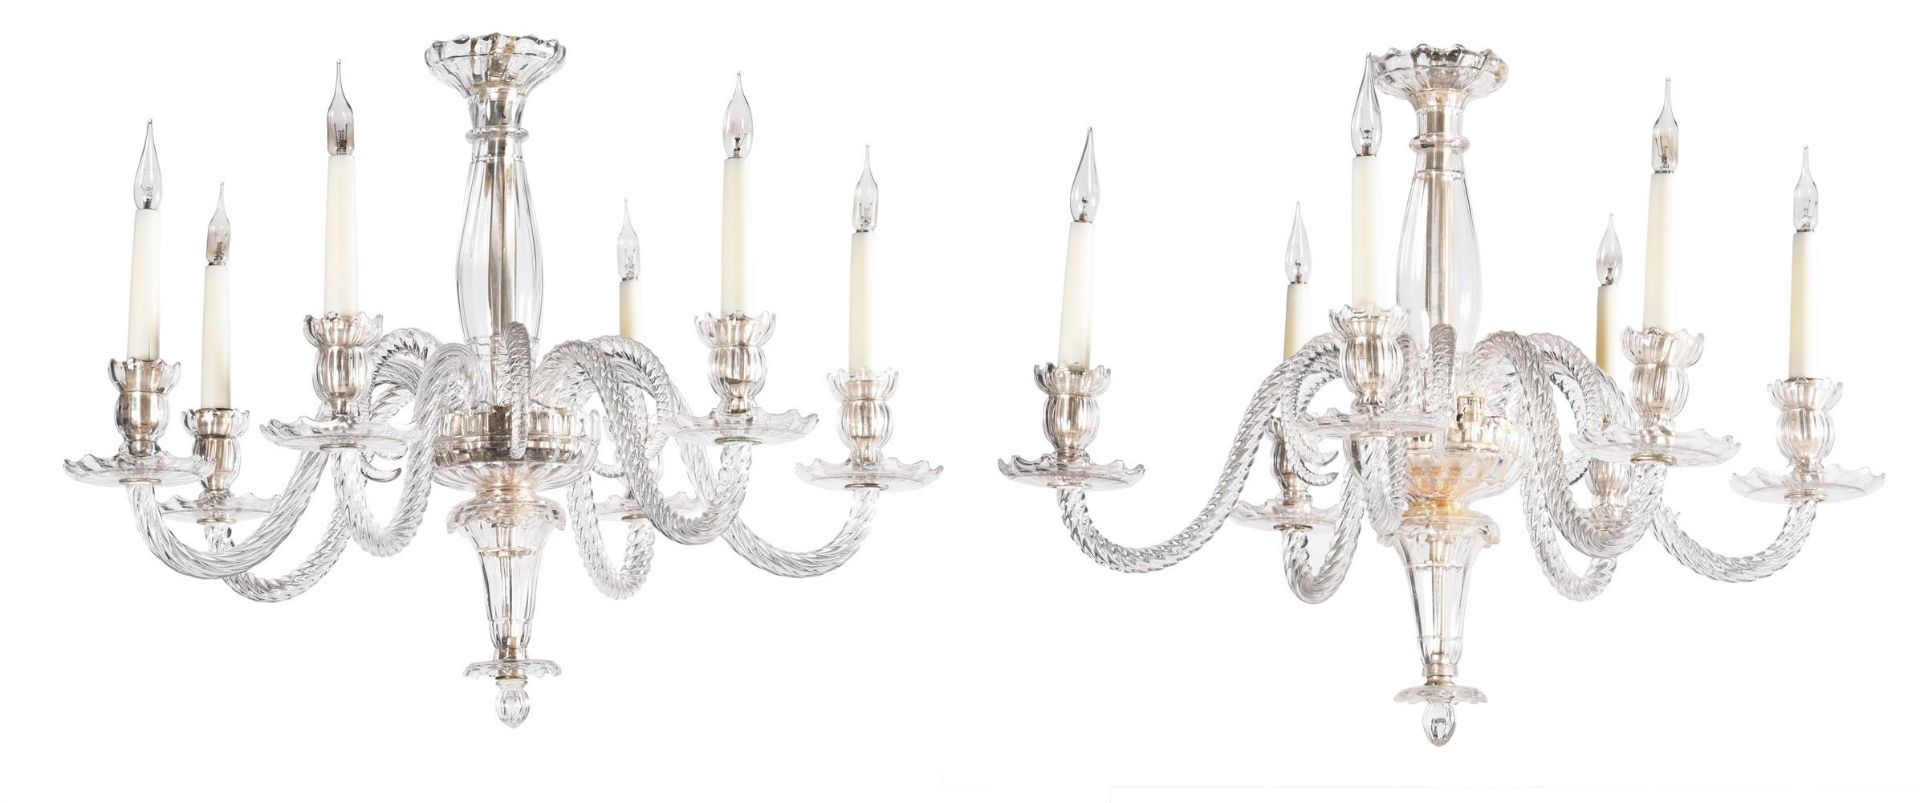 A PAIR OF VENETIAN GLASS SIX-BRANCH CHANDELIERS